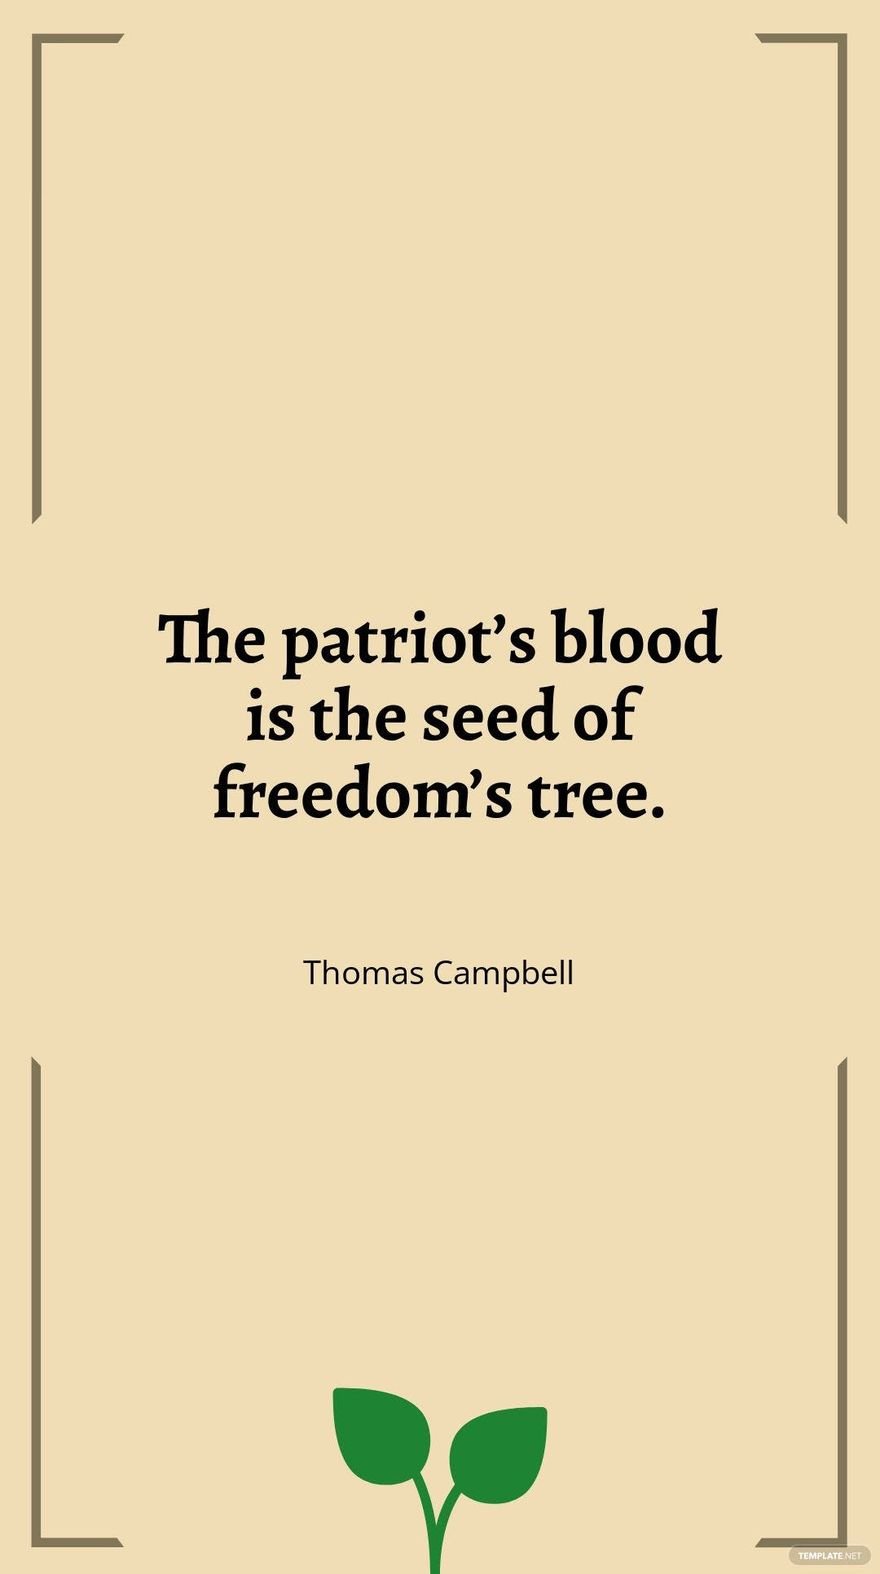 Thomas Campbell - “The patriot’s blood is the seed of freedom’s tree.” in JPG